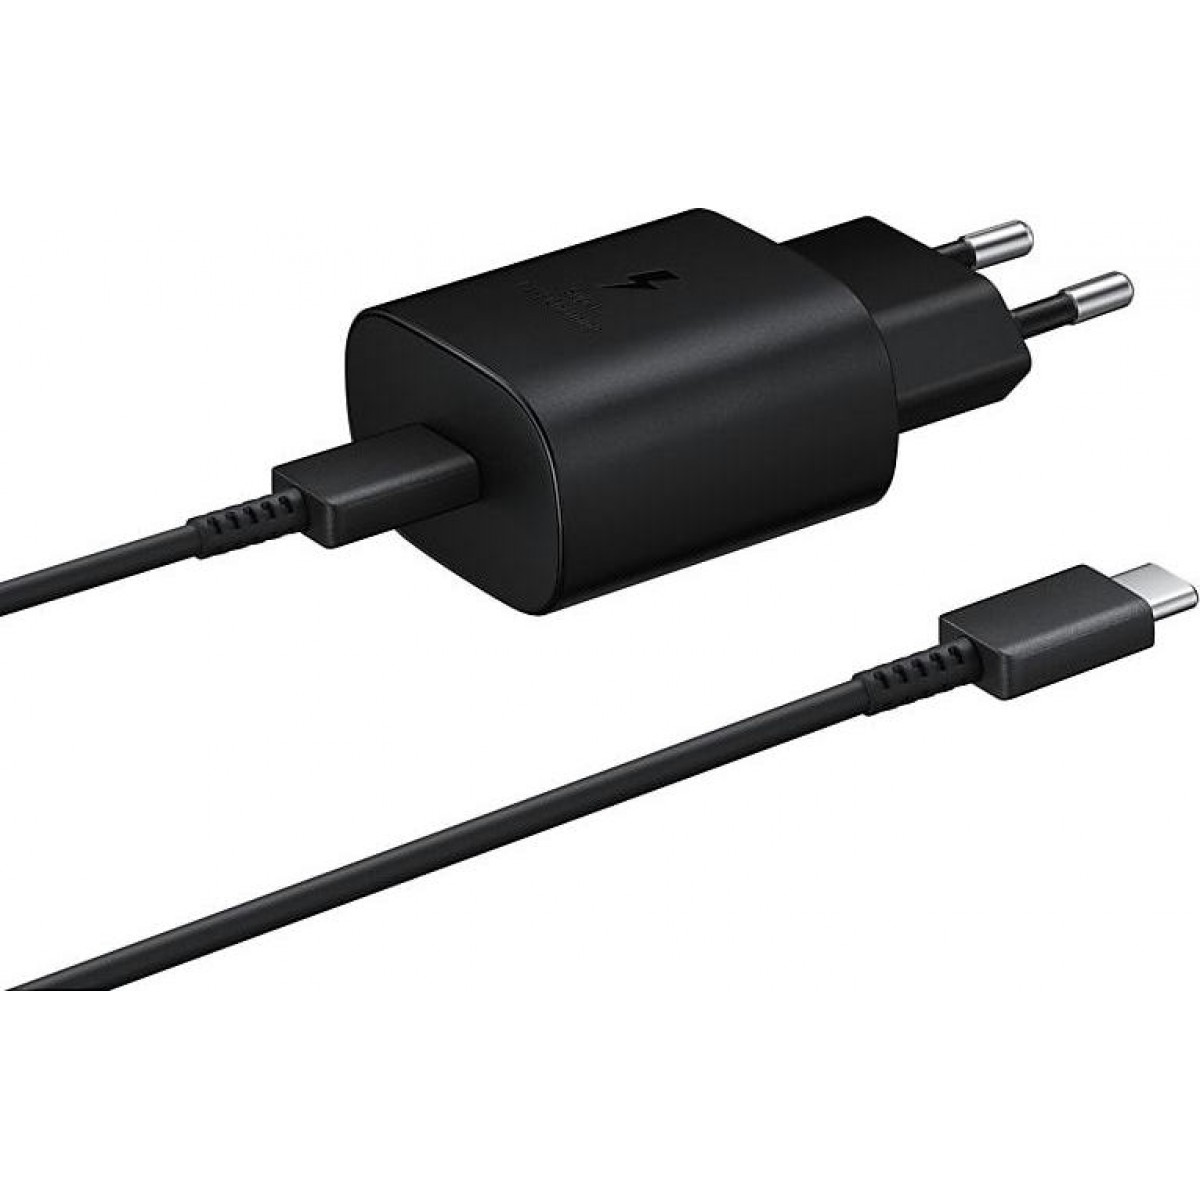 Samsung USB Type-C Cable & Wall Adapter Black (EP-TA800XBEGWW)